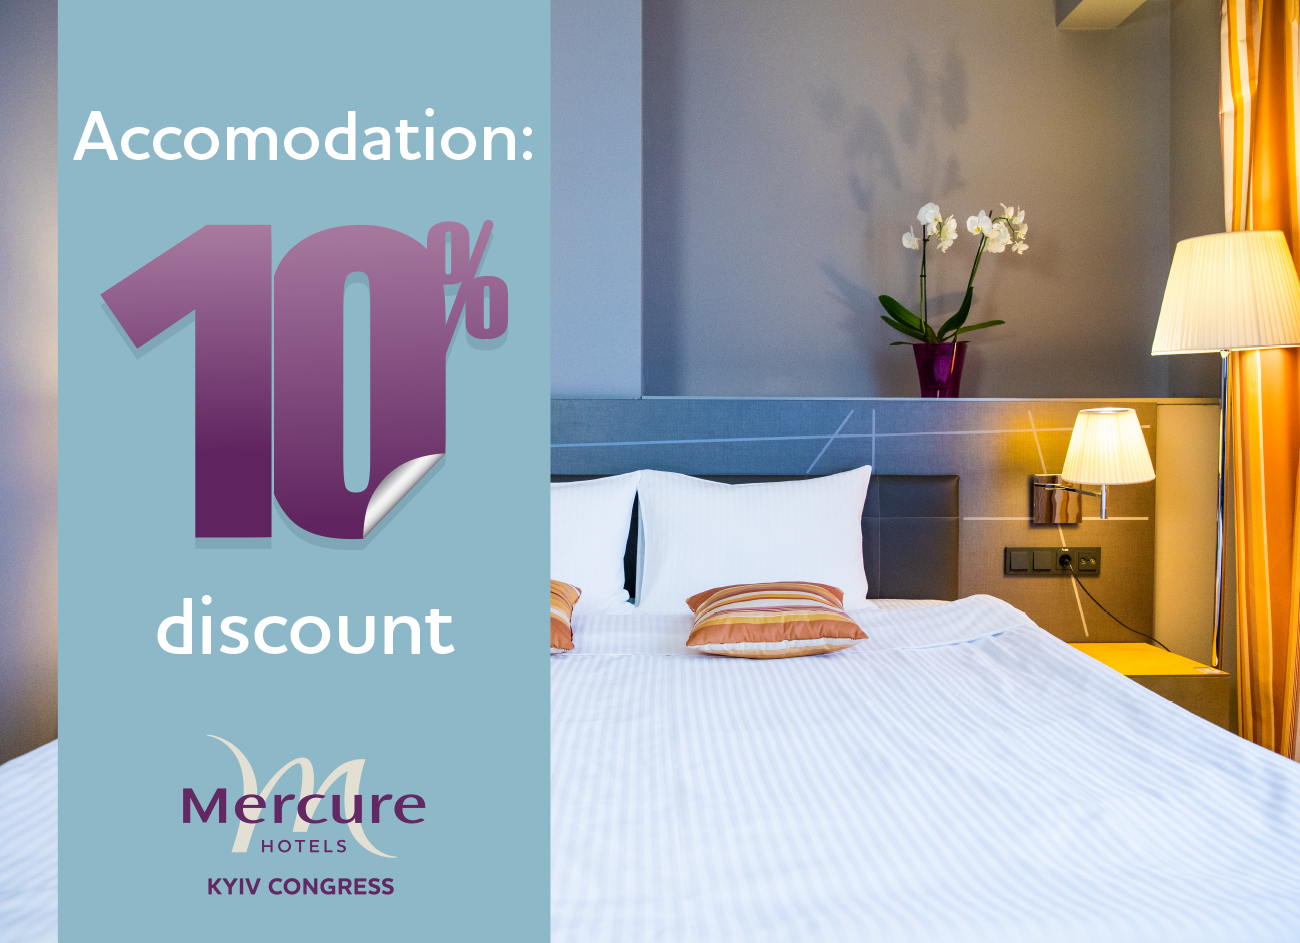 Special March offer by Mercure